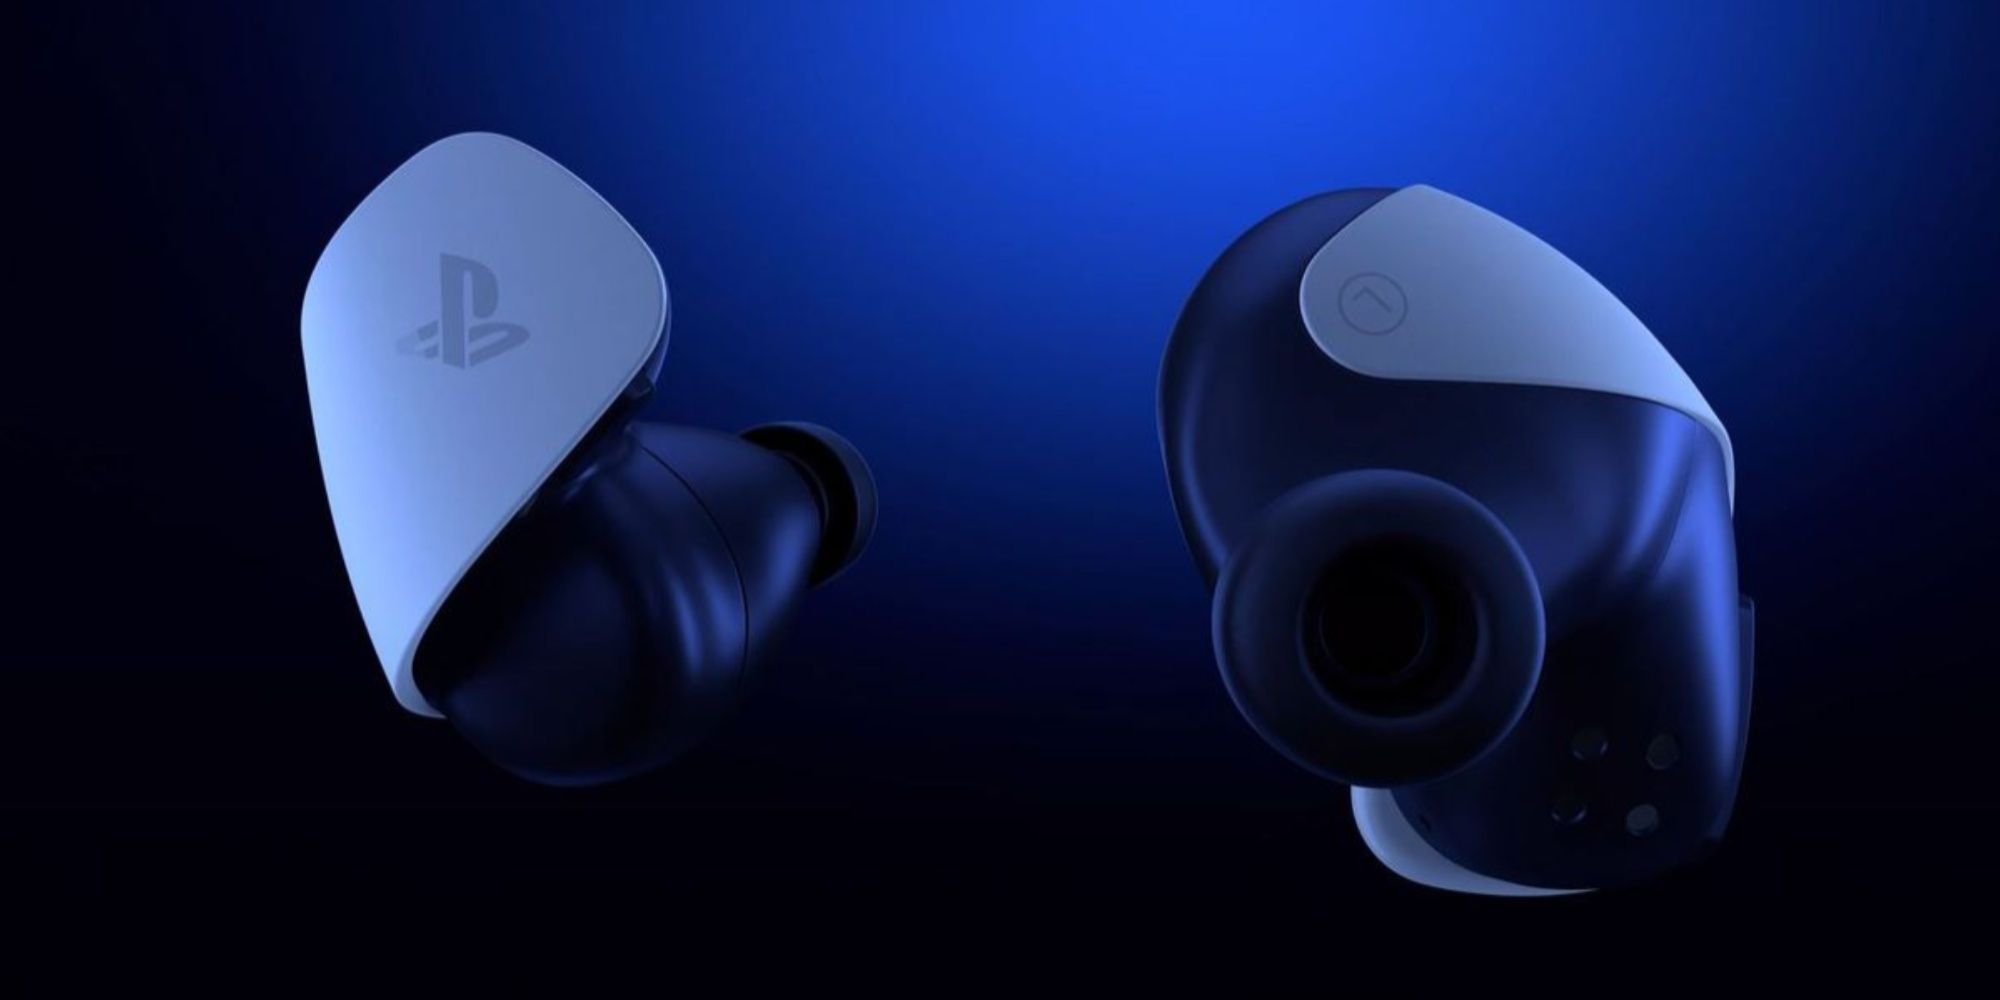 Sony's Pulse Explore Earbuds Will Come at a Premium Price of $199.99: Are  They Worth It?